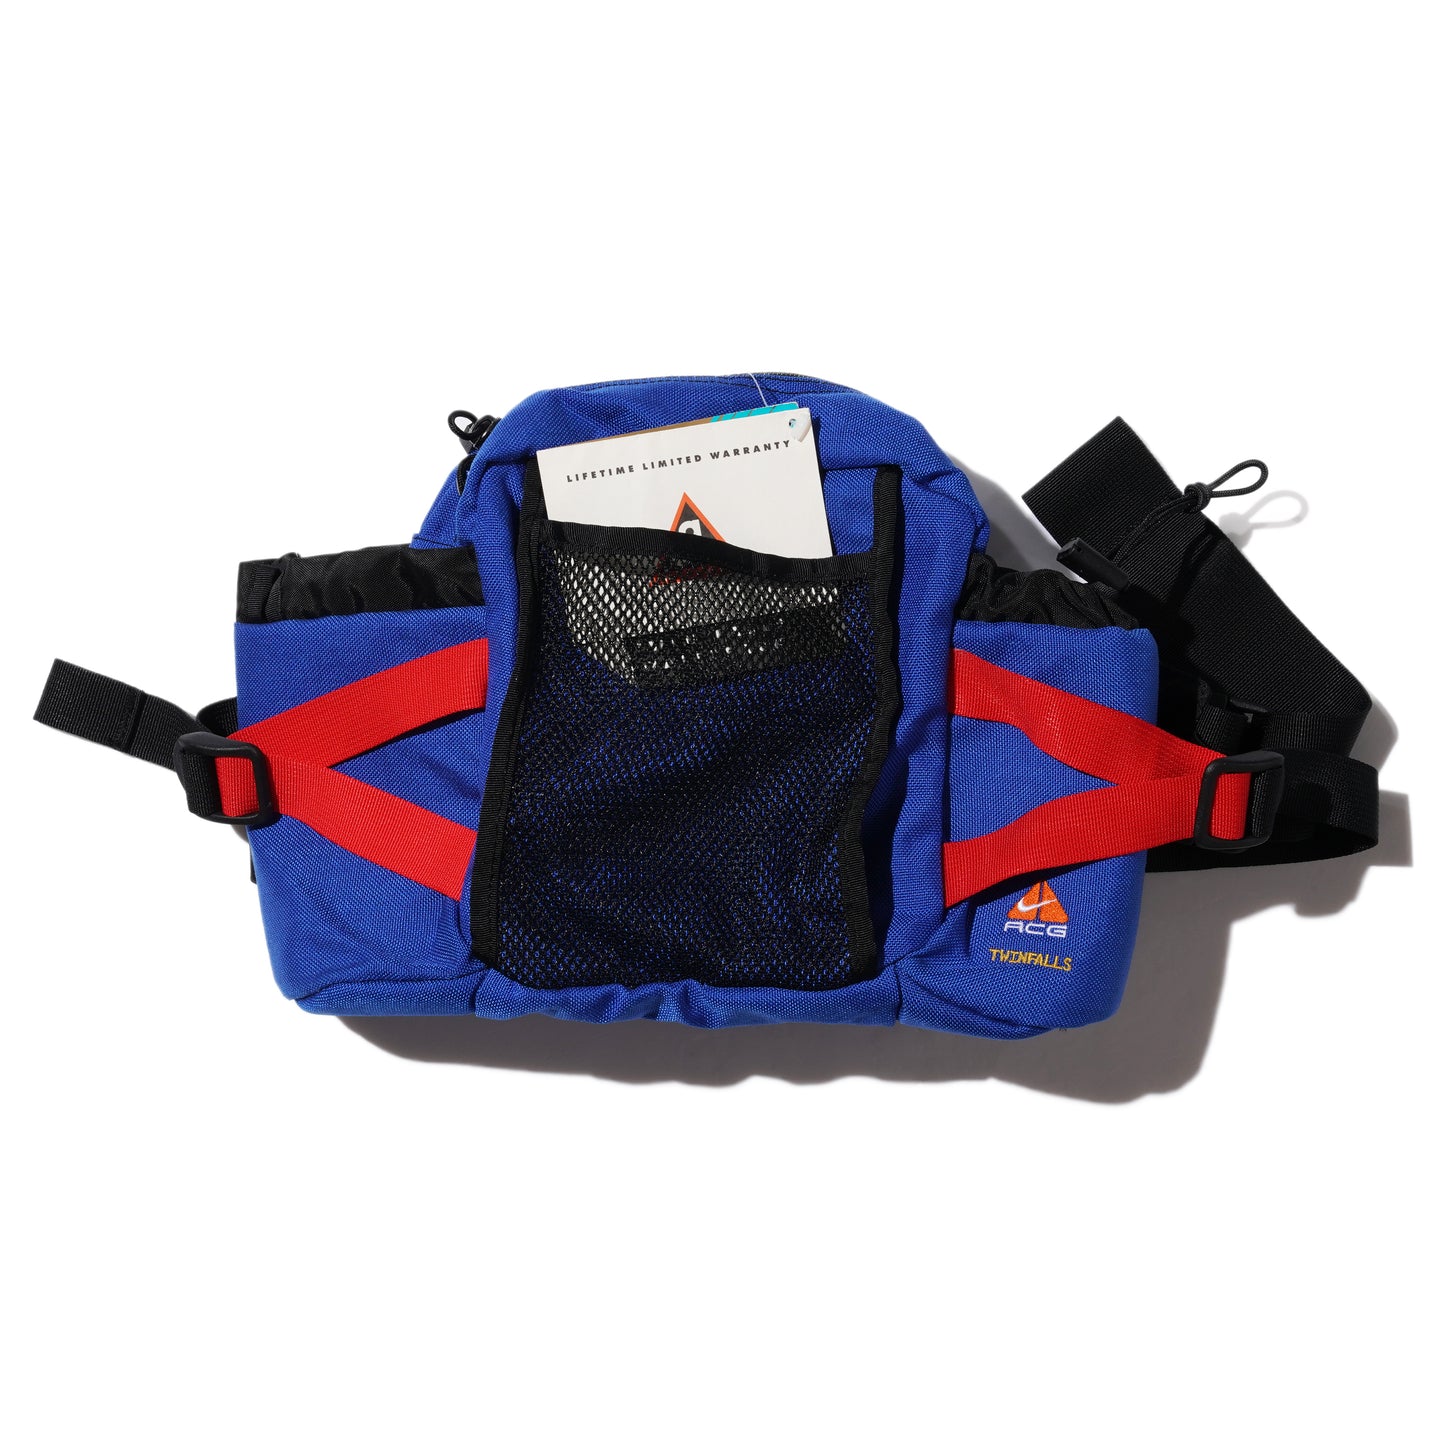 NIKE ACG TWINFALLS POUCH BAG (RED / BLUE)